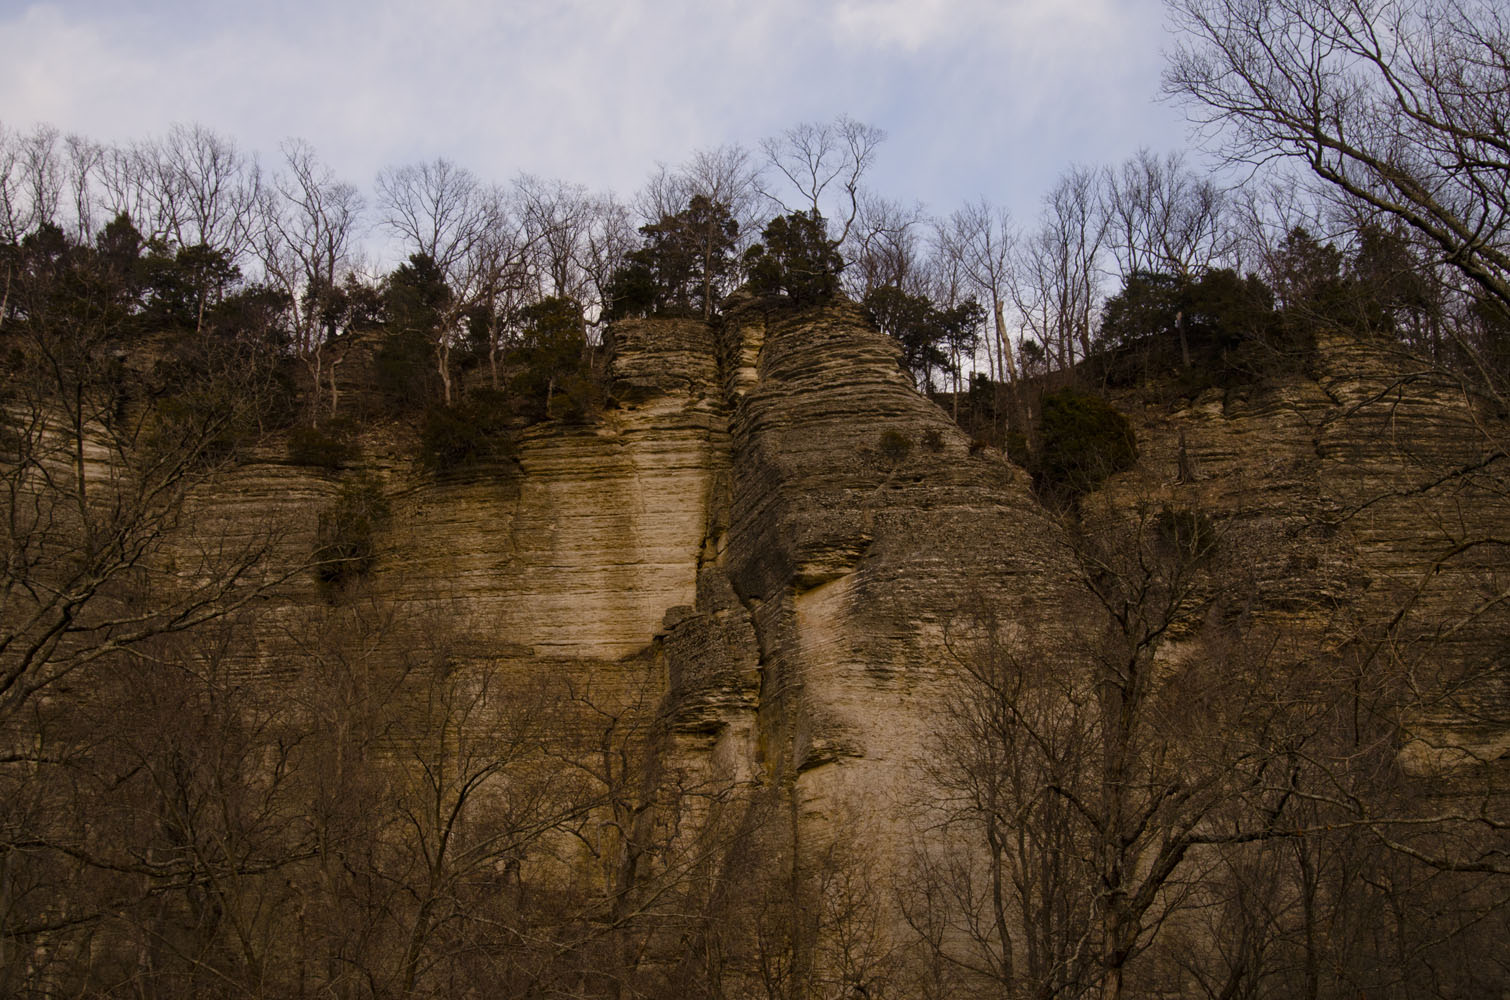 The cliff face at Pine Hills State Park.